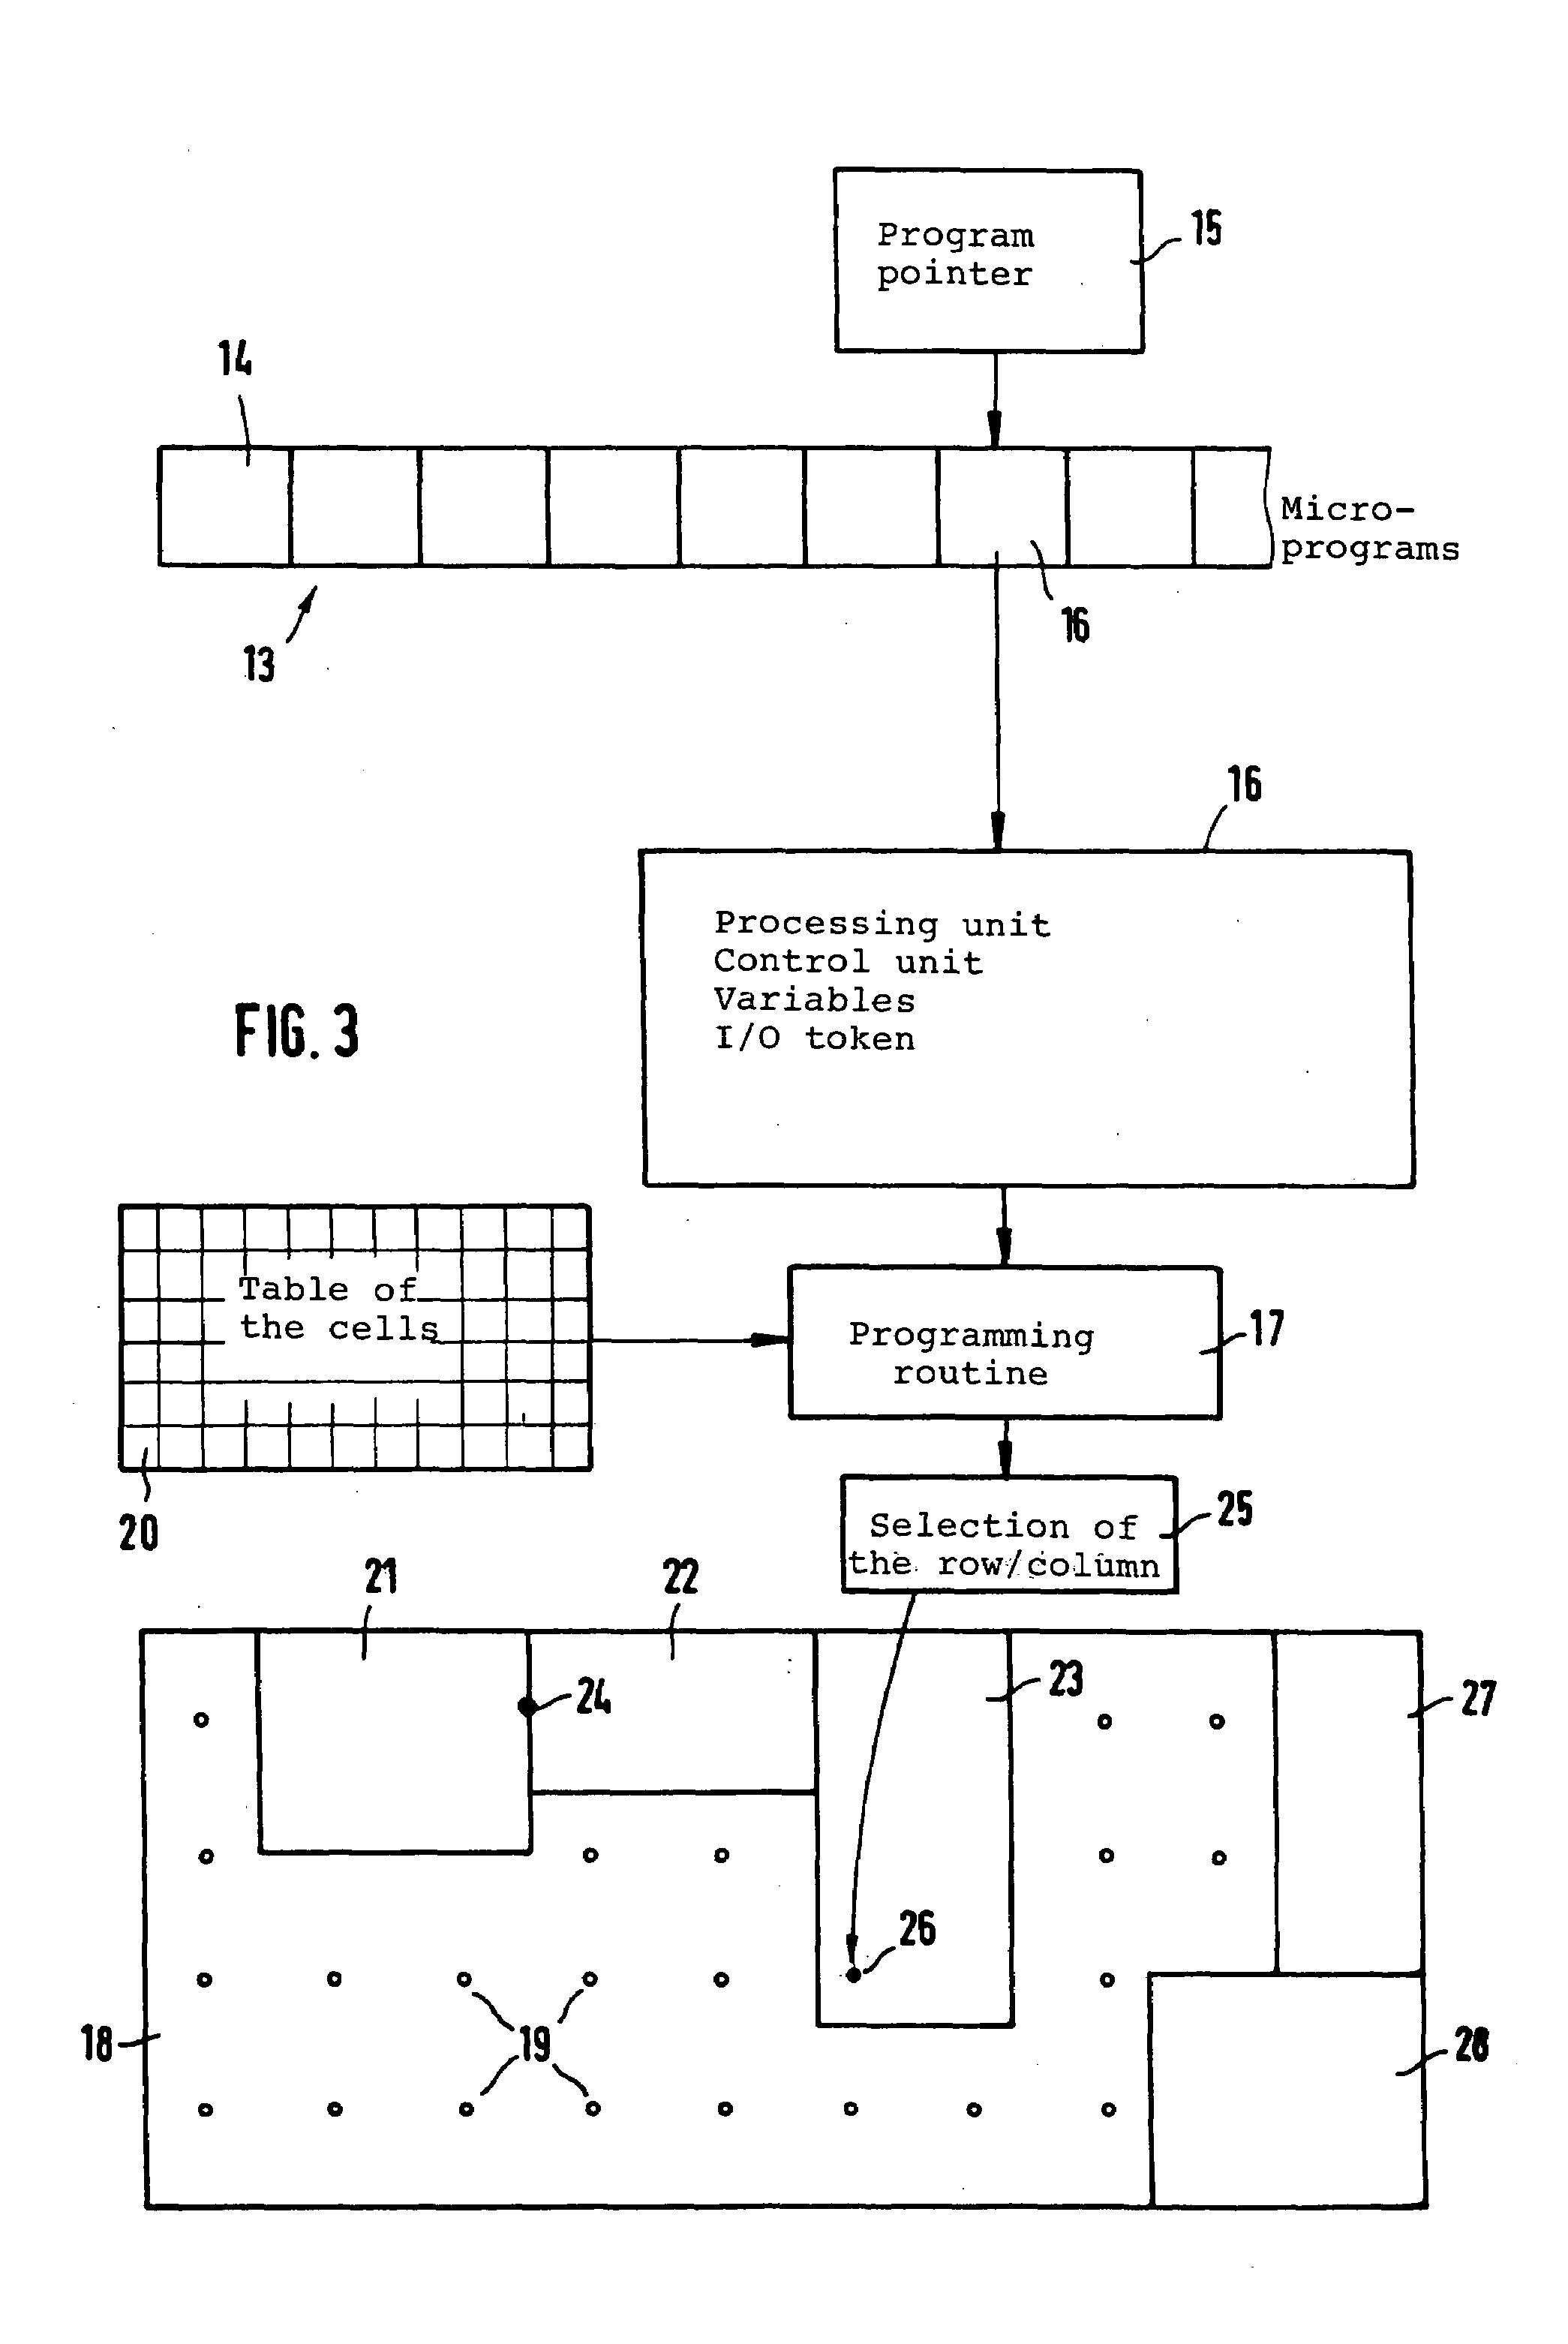 Reprogrammable microprogram based reconfigurable multi-cell logic concurrently processing configuration and data signals